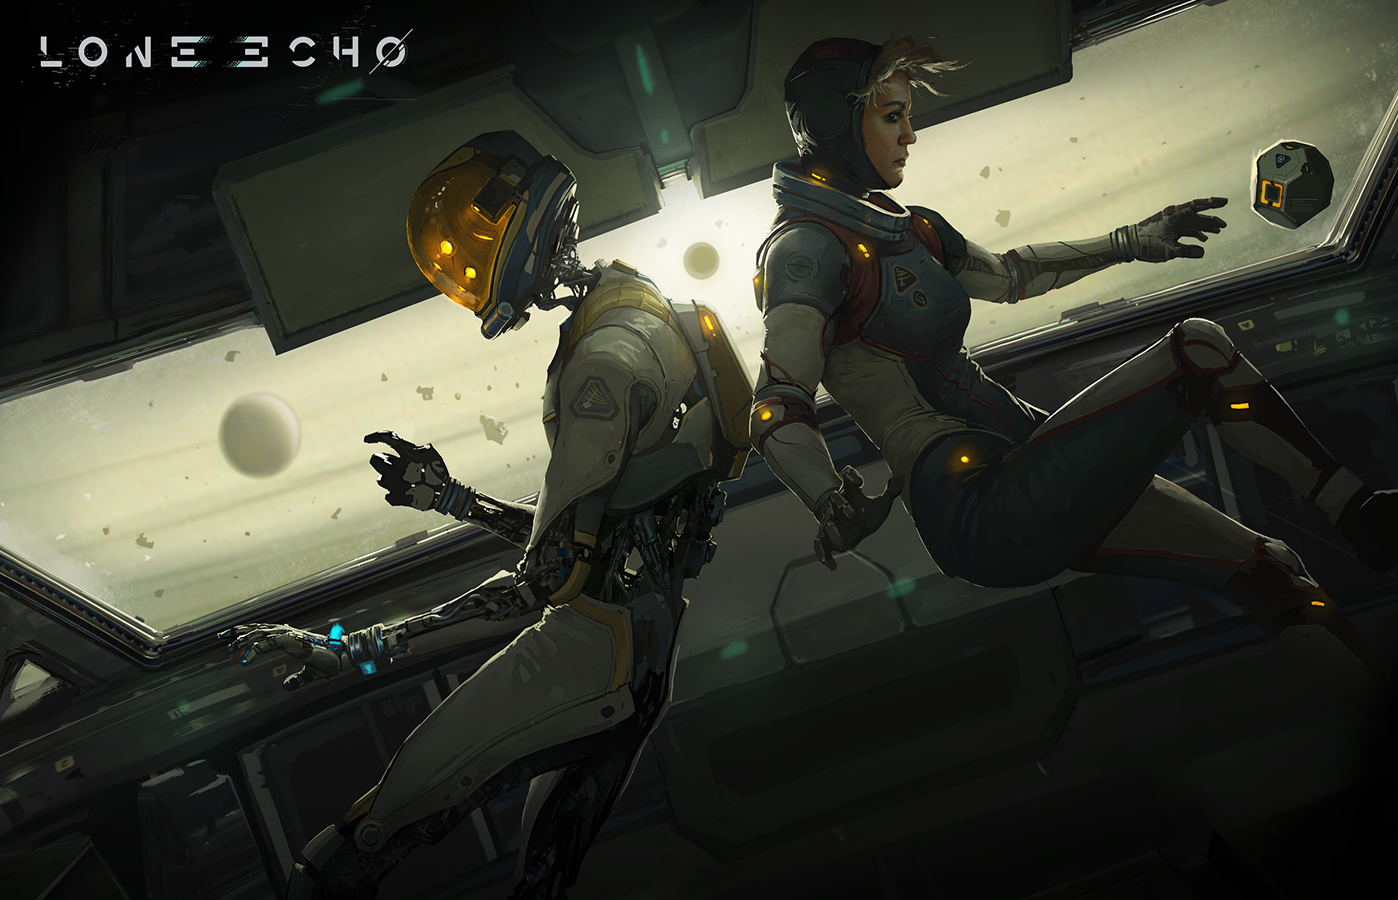 Image for Lone Echo proves that solo story-driven games can work brilliantly in VR